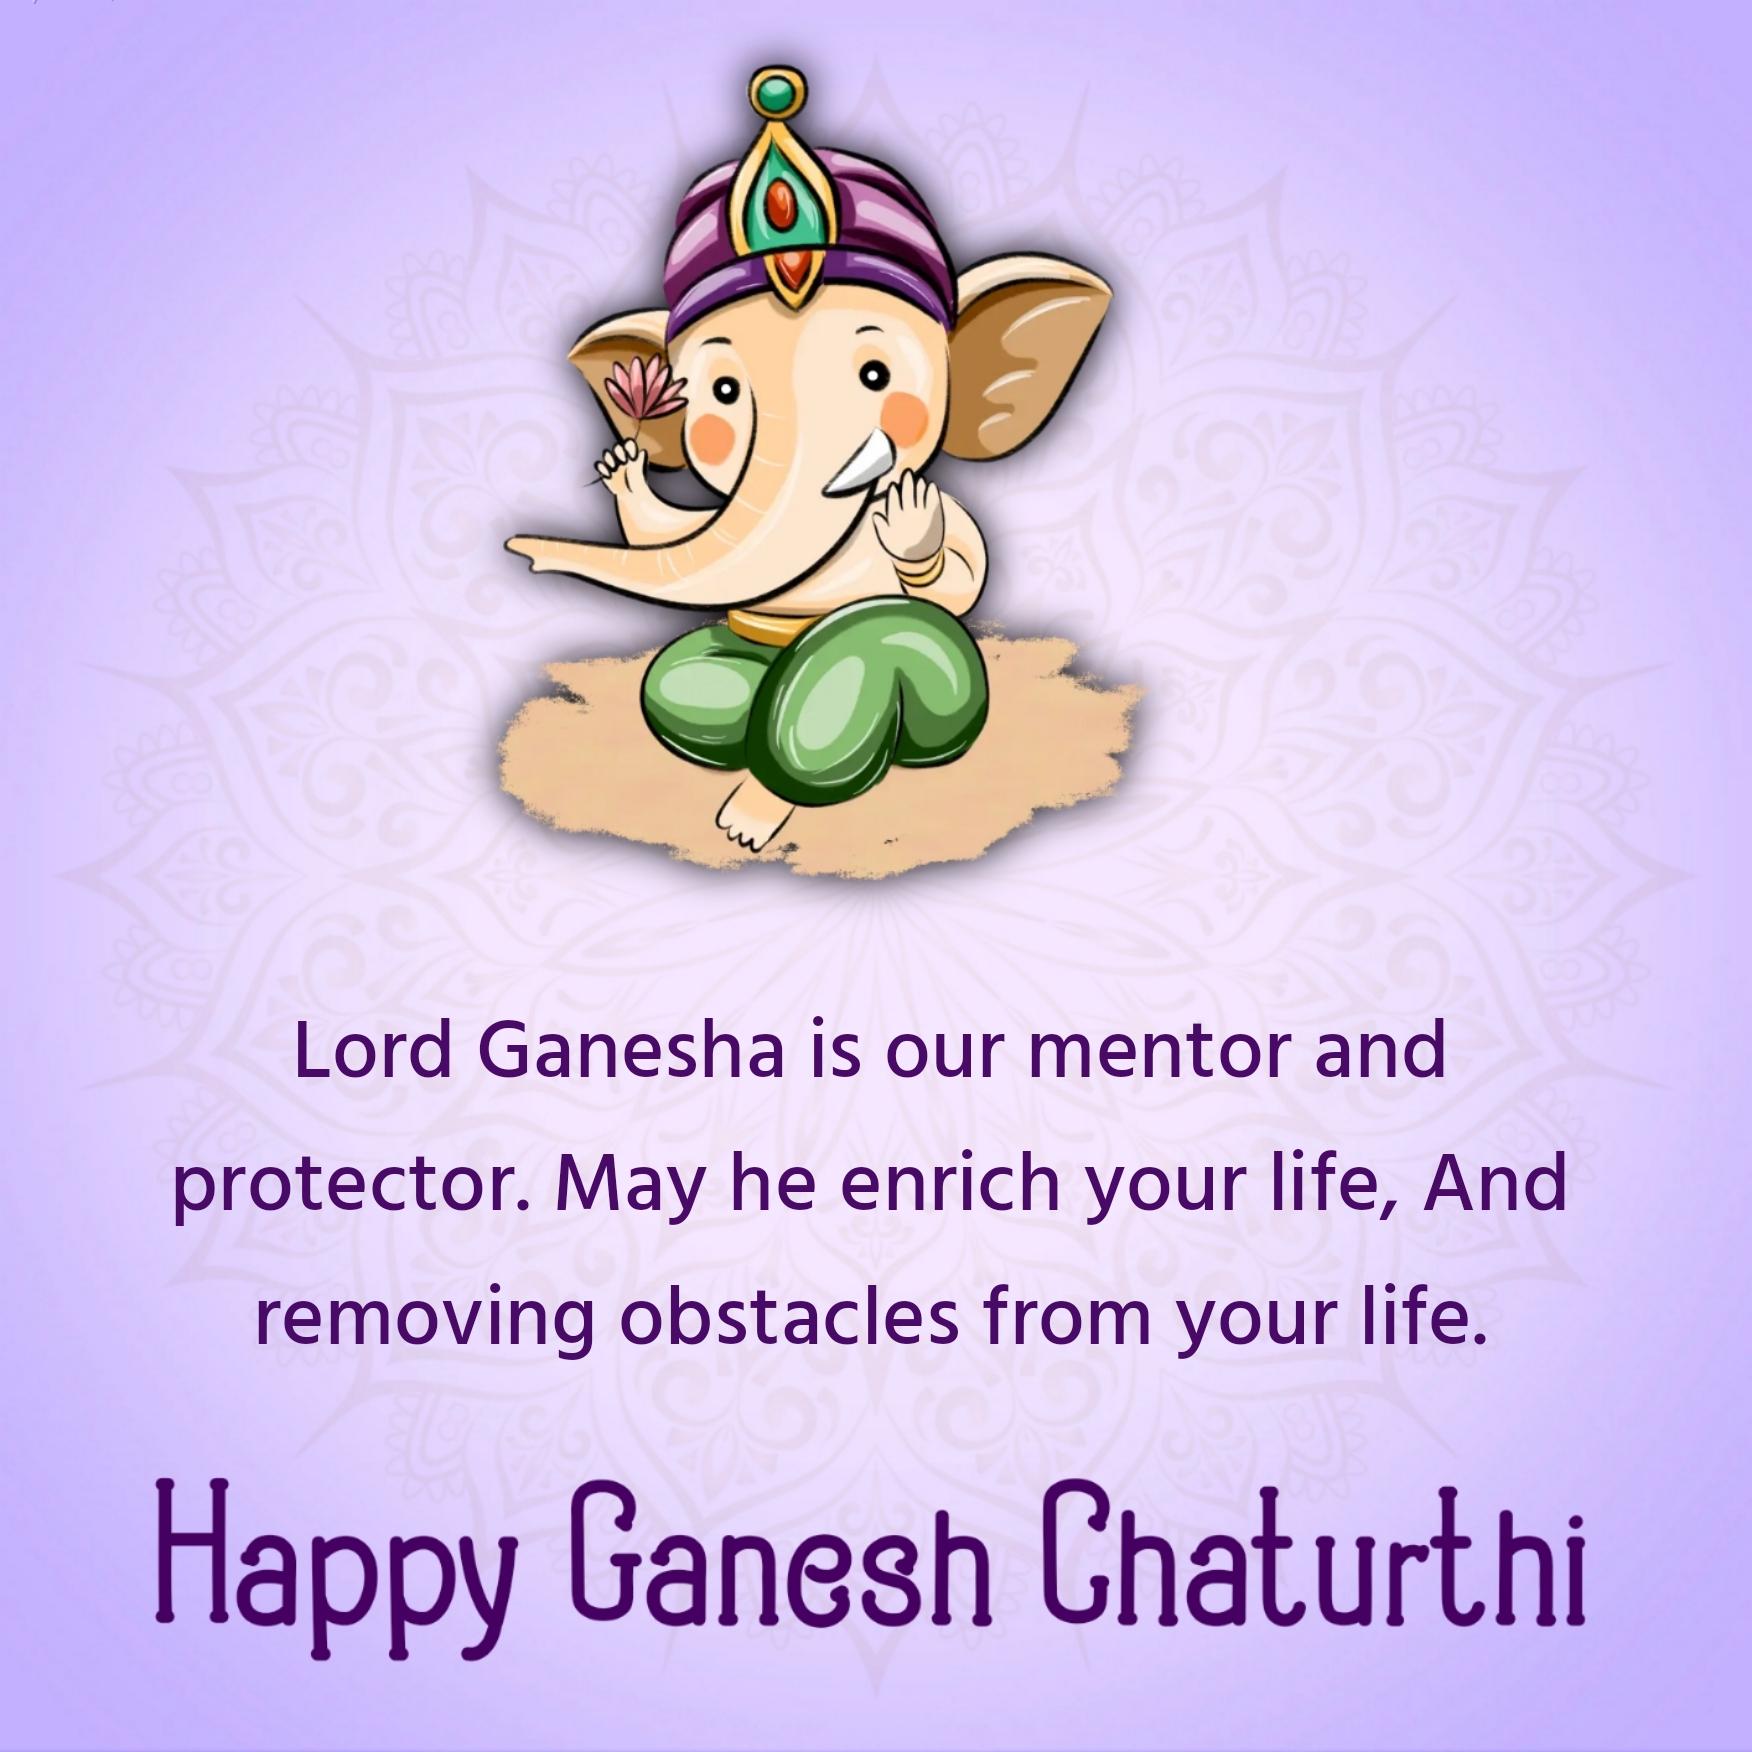 Lord Ganesha is our mentor and protector